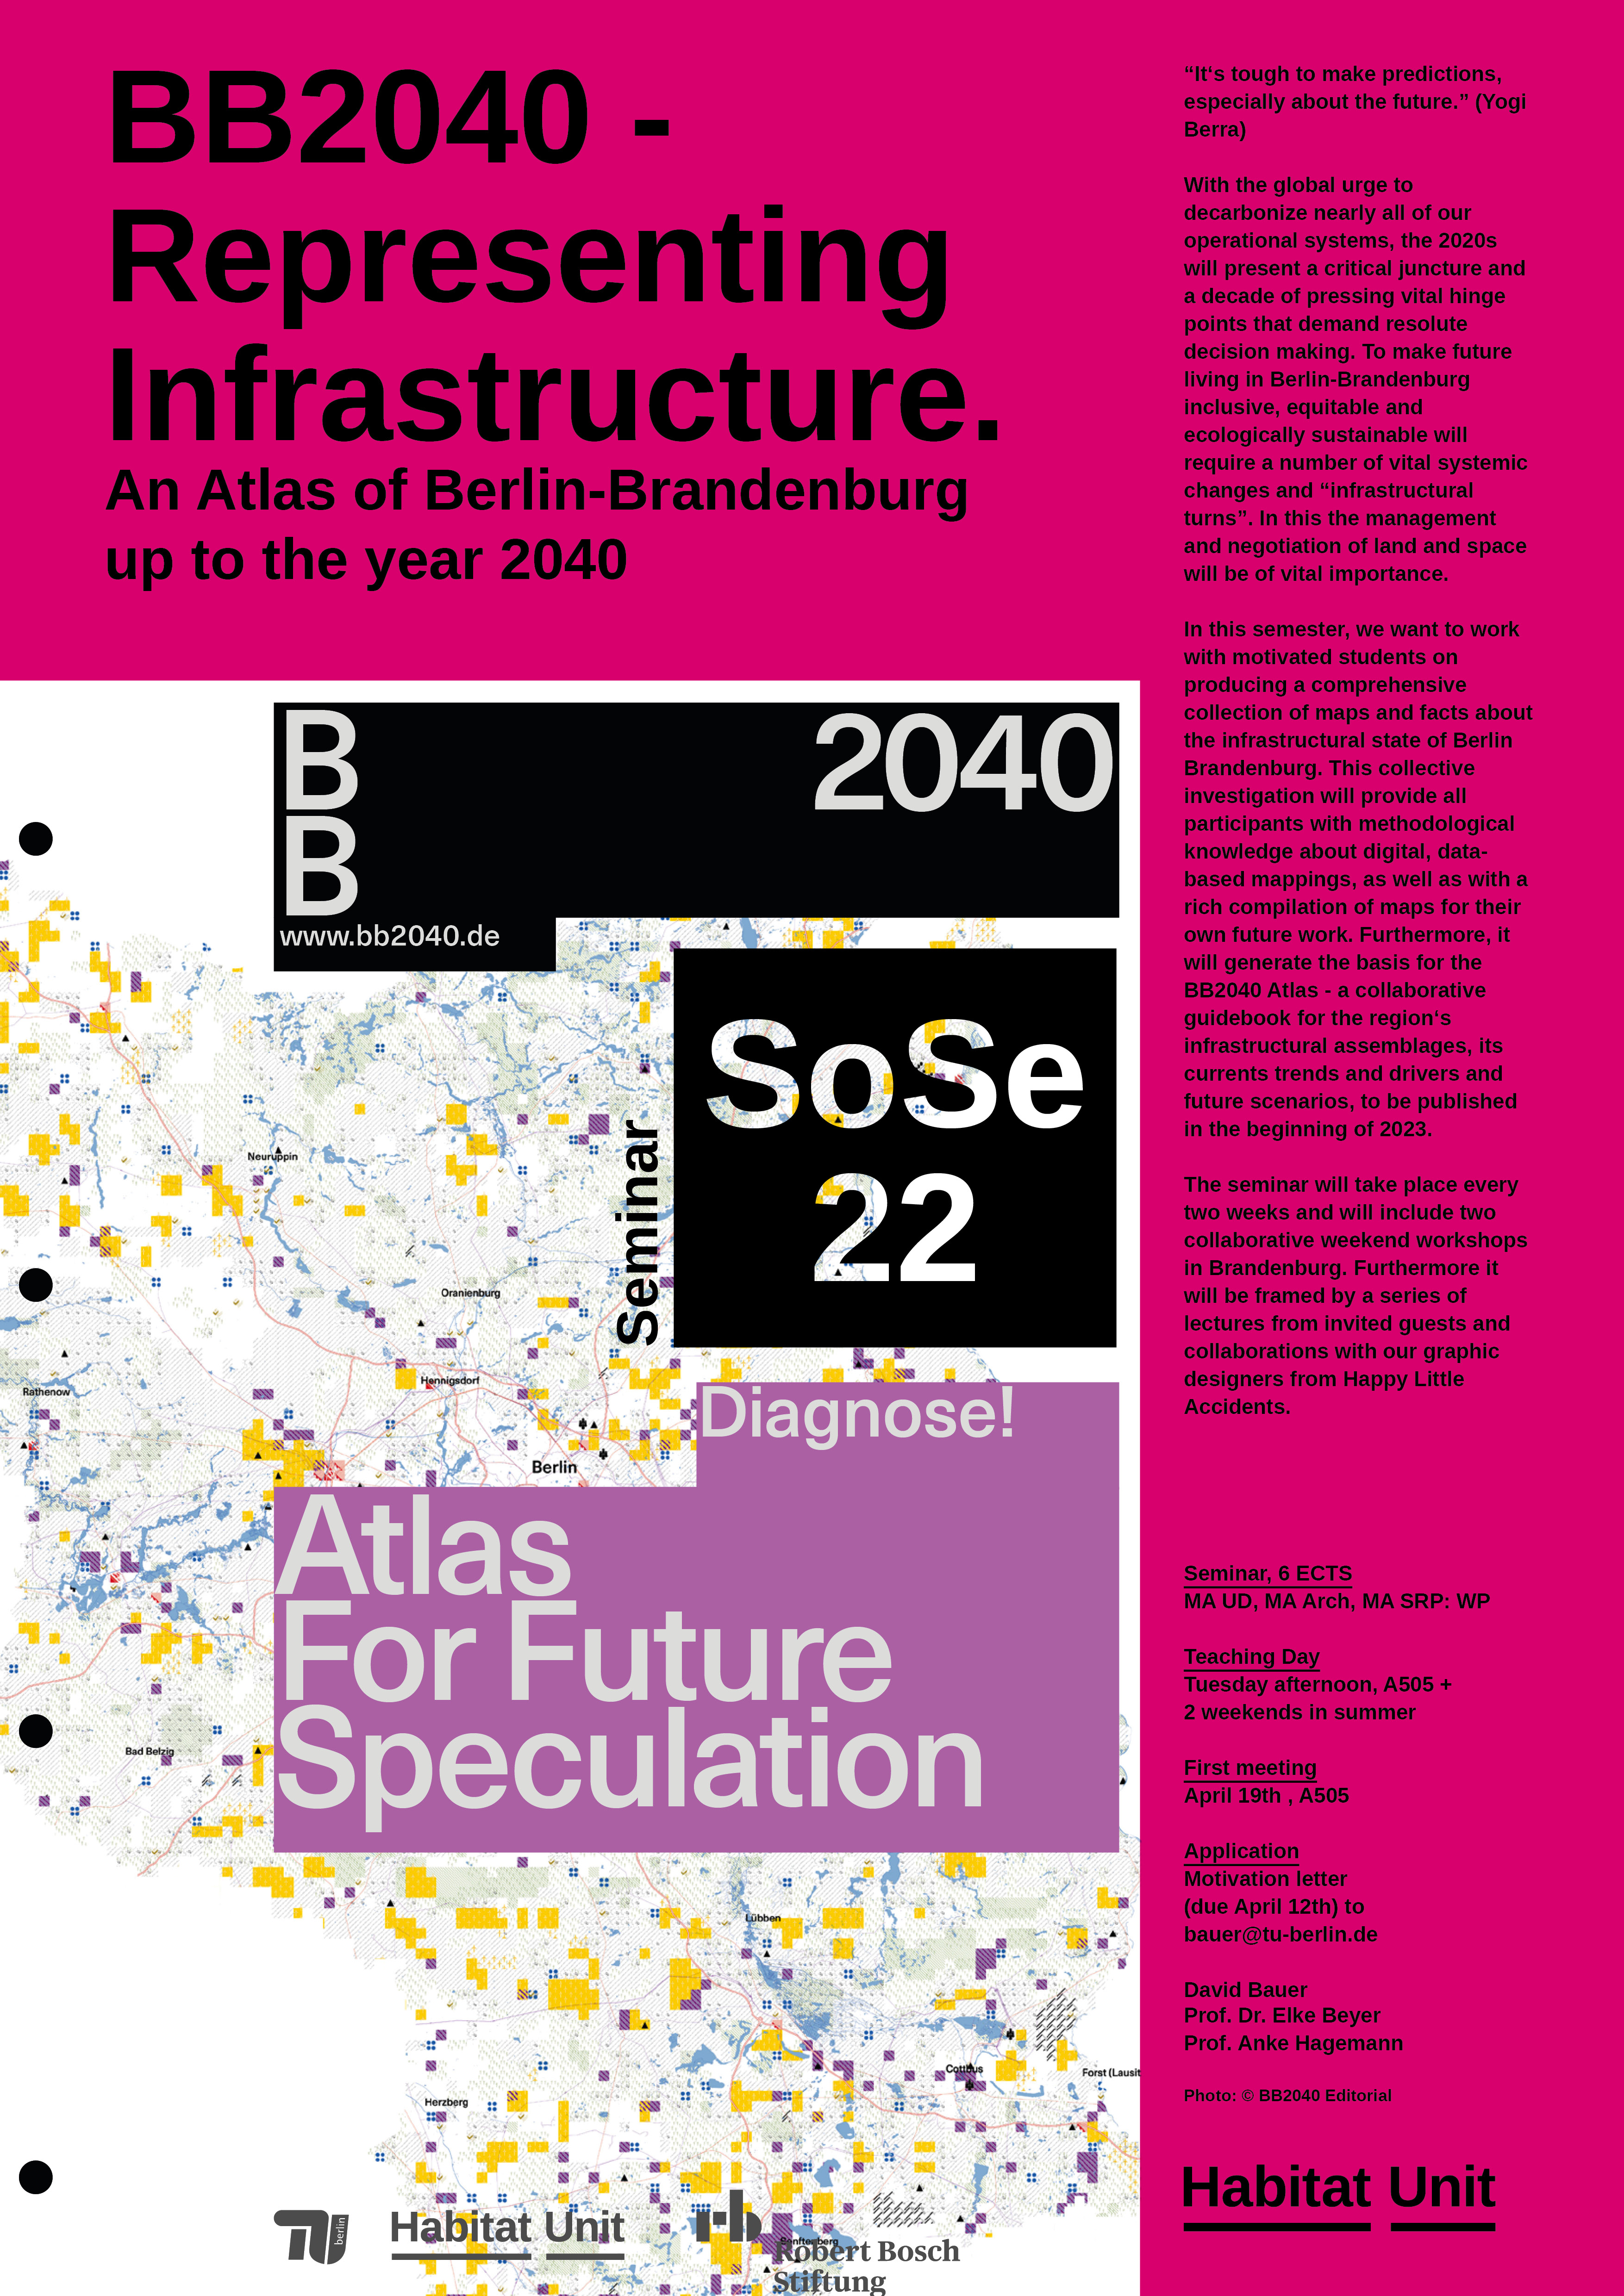 BB2040 - Representing Infrastructure Poster